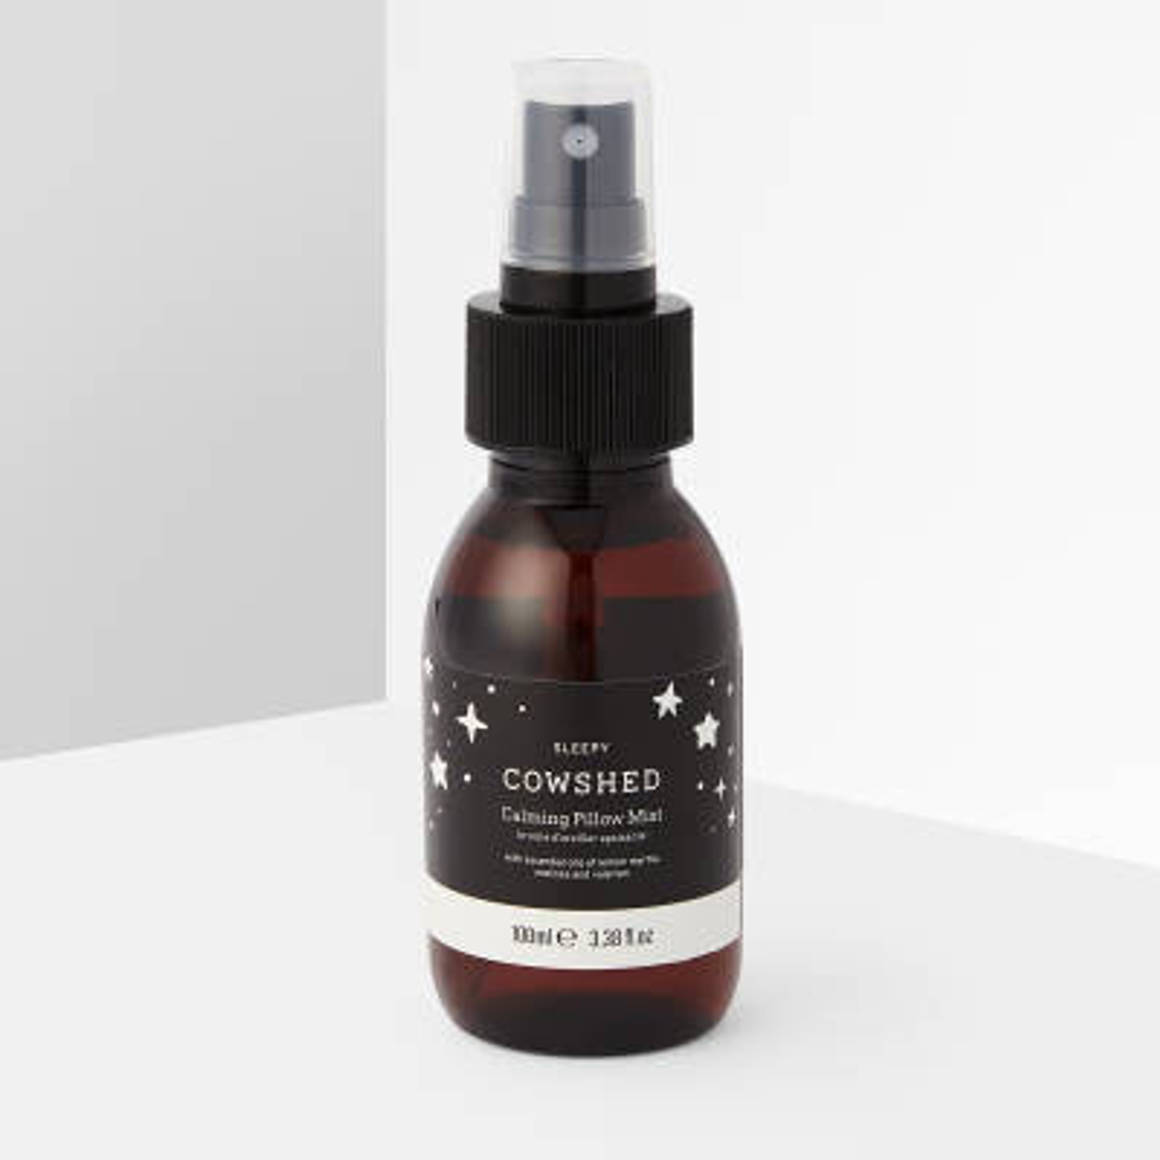 Cowshed Calming Pillow Mist